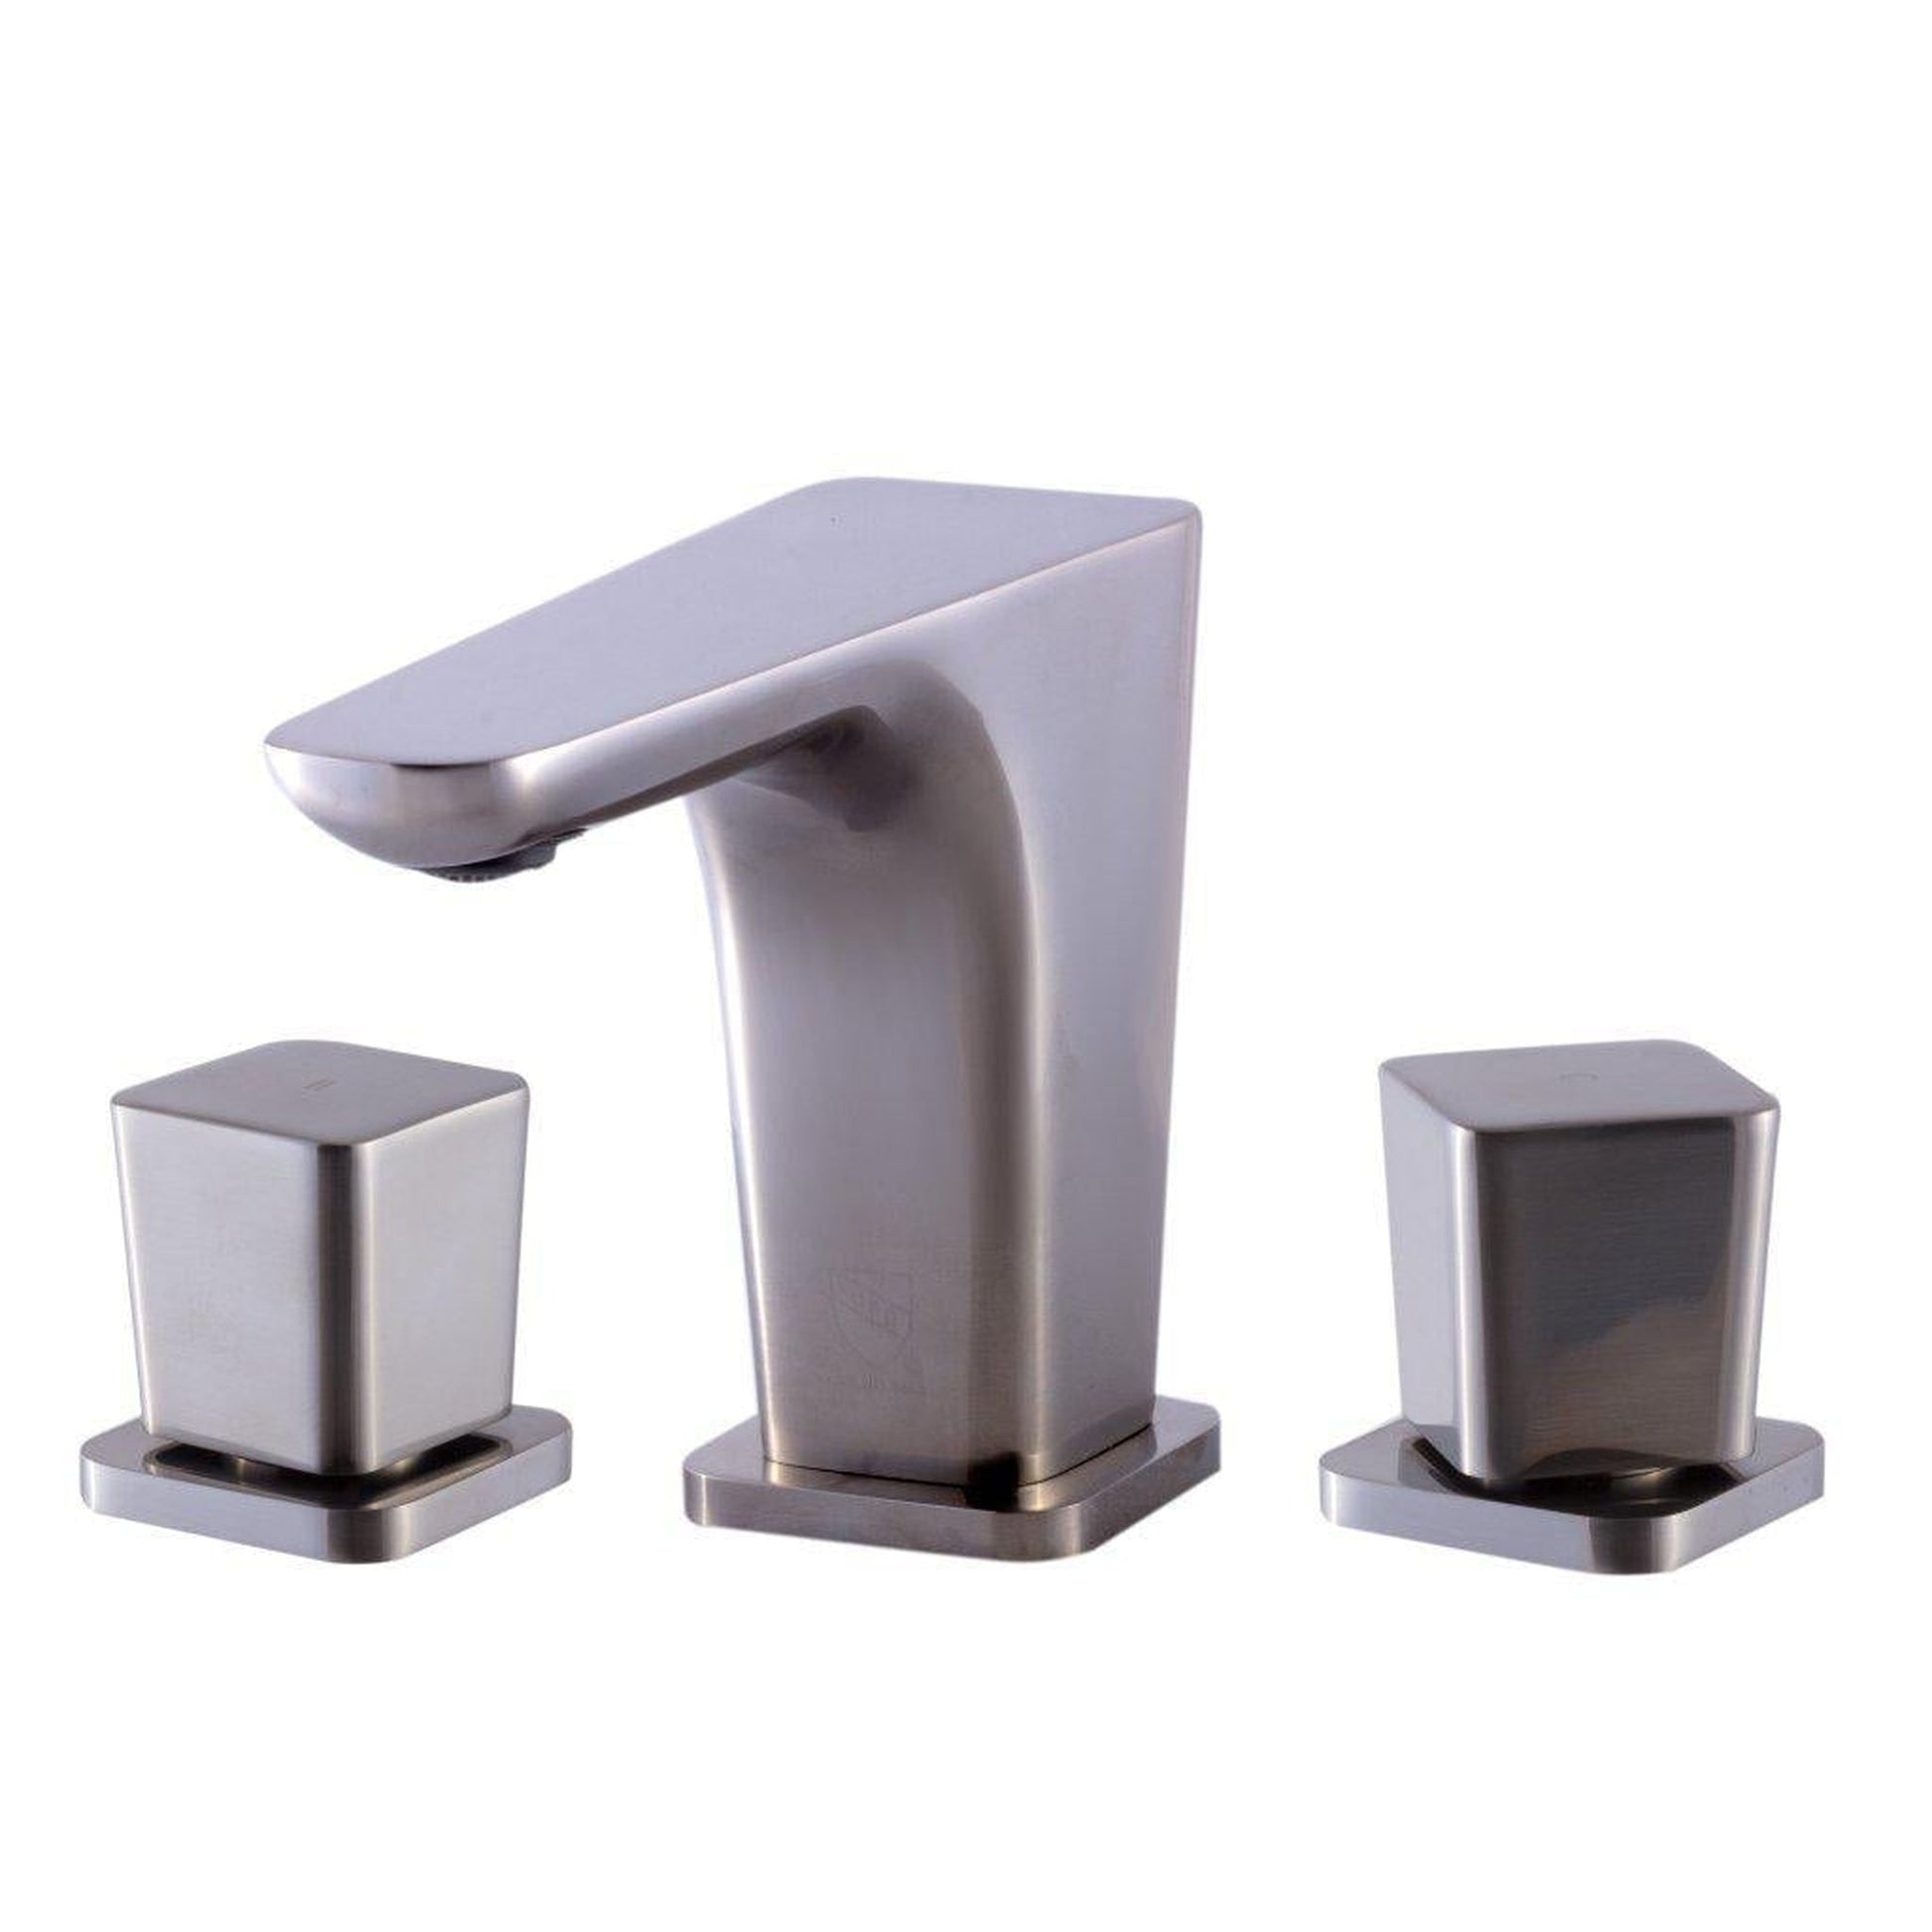 ALFI Brand AB1782-BN Brushed Nickel Widespread Brass Bathroom Sink Faucet With Double Knob